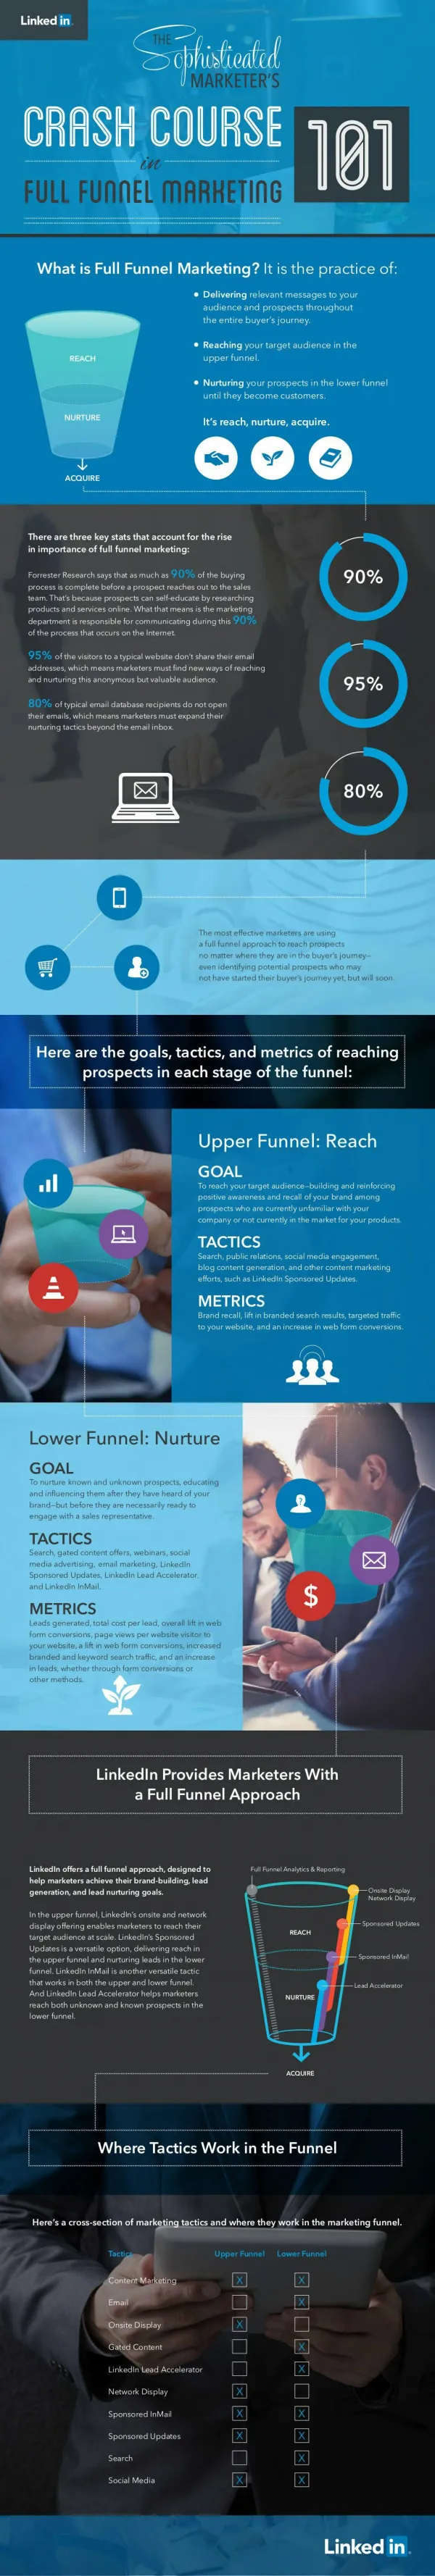 A sophisticated Marketer's Crash Course in Full Funnel Marketing - 101- INFOGRAPHIC